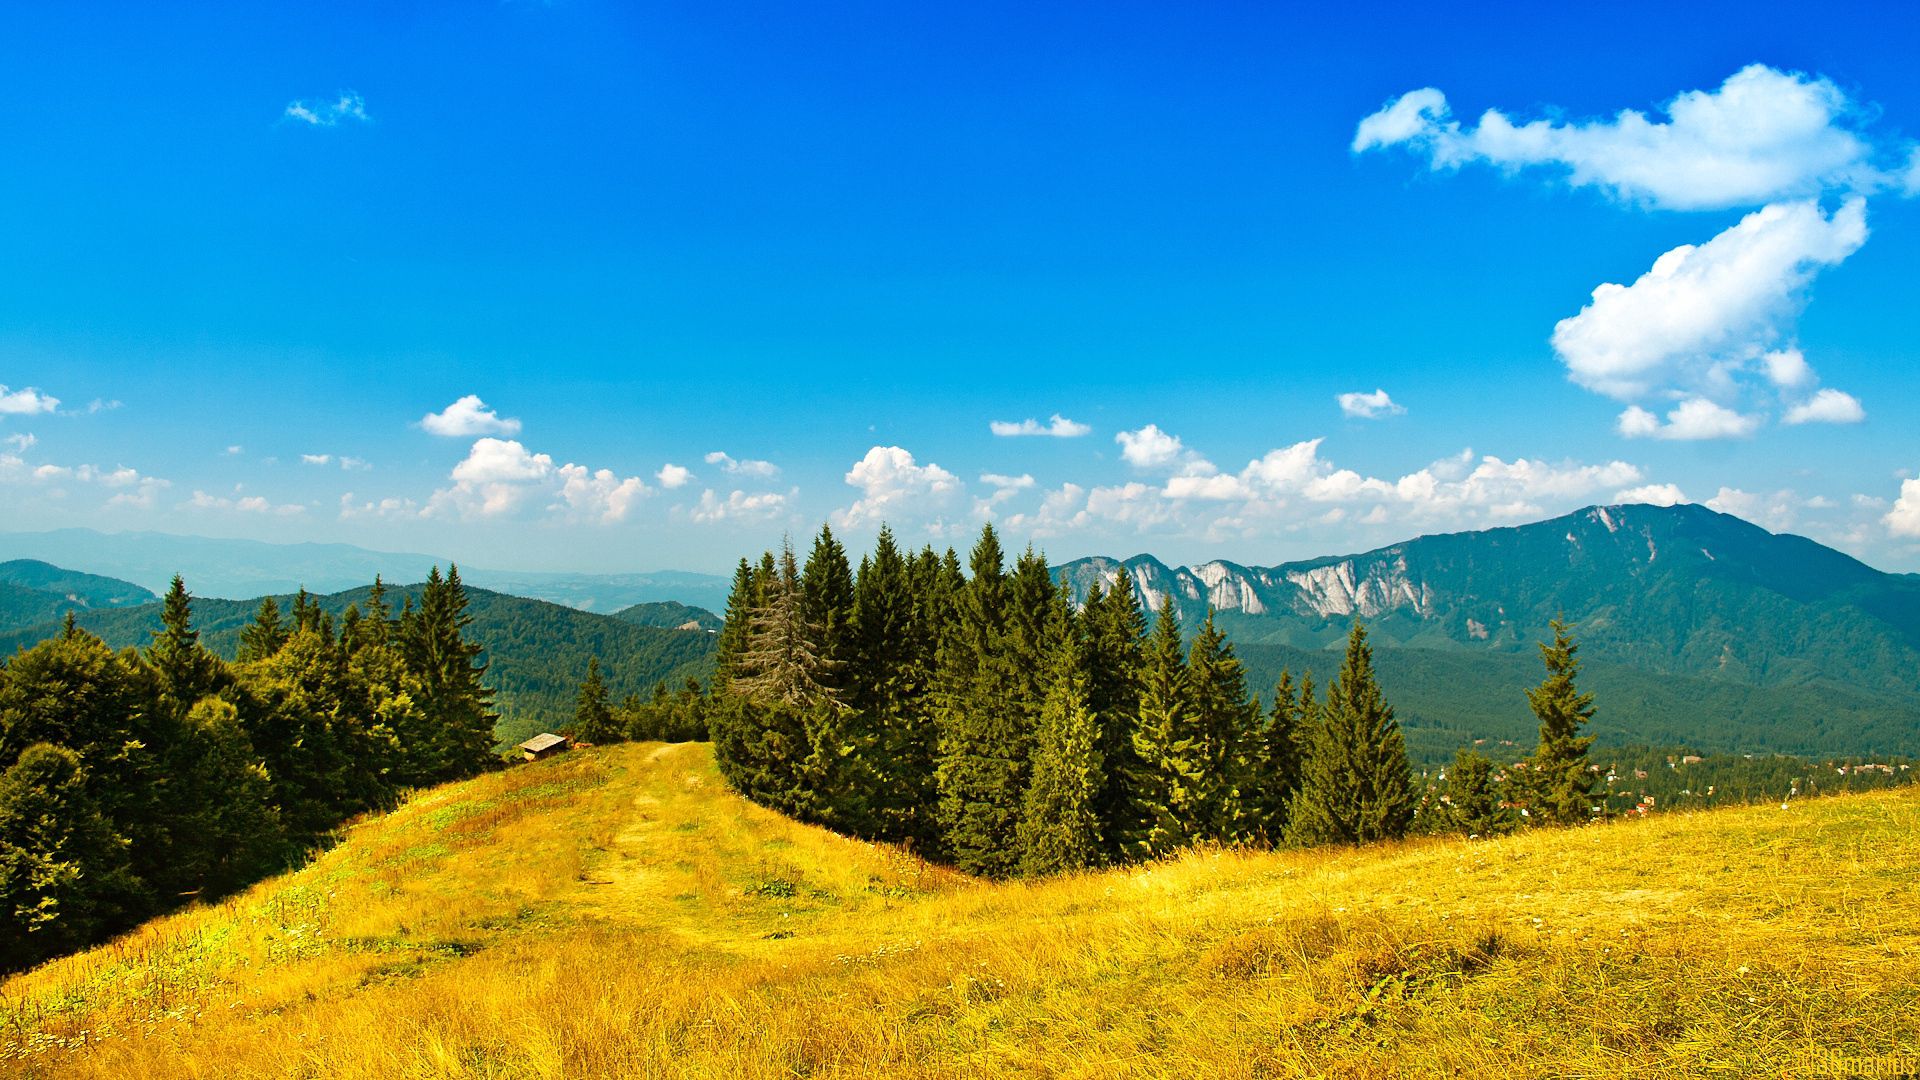 mountains, blue, coniferous, nature, i see, conifers, trees, sunny, freshness, sky, clear, yellow